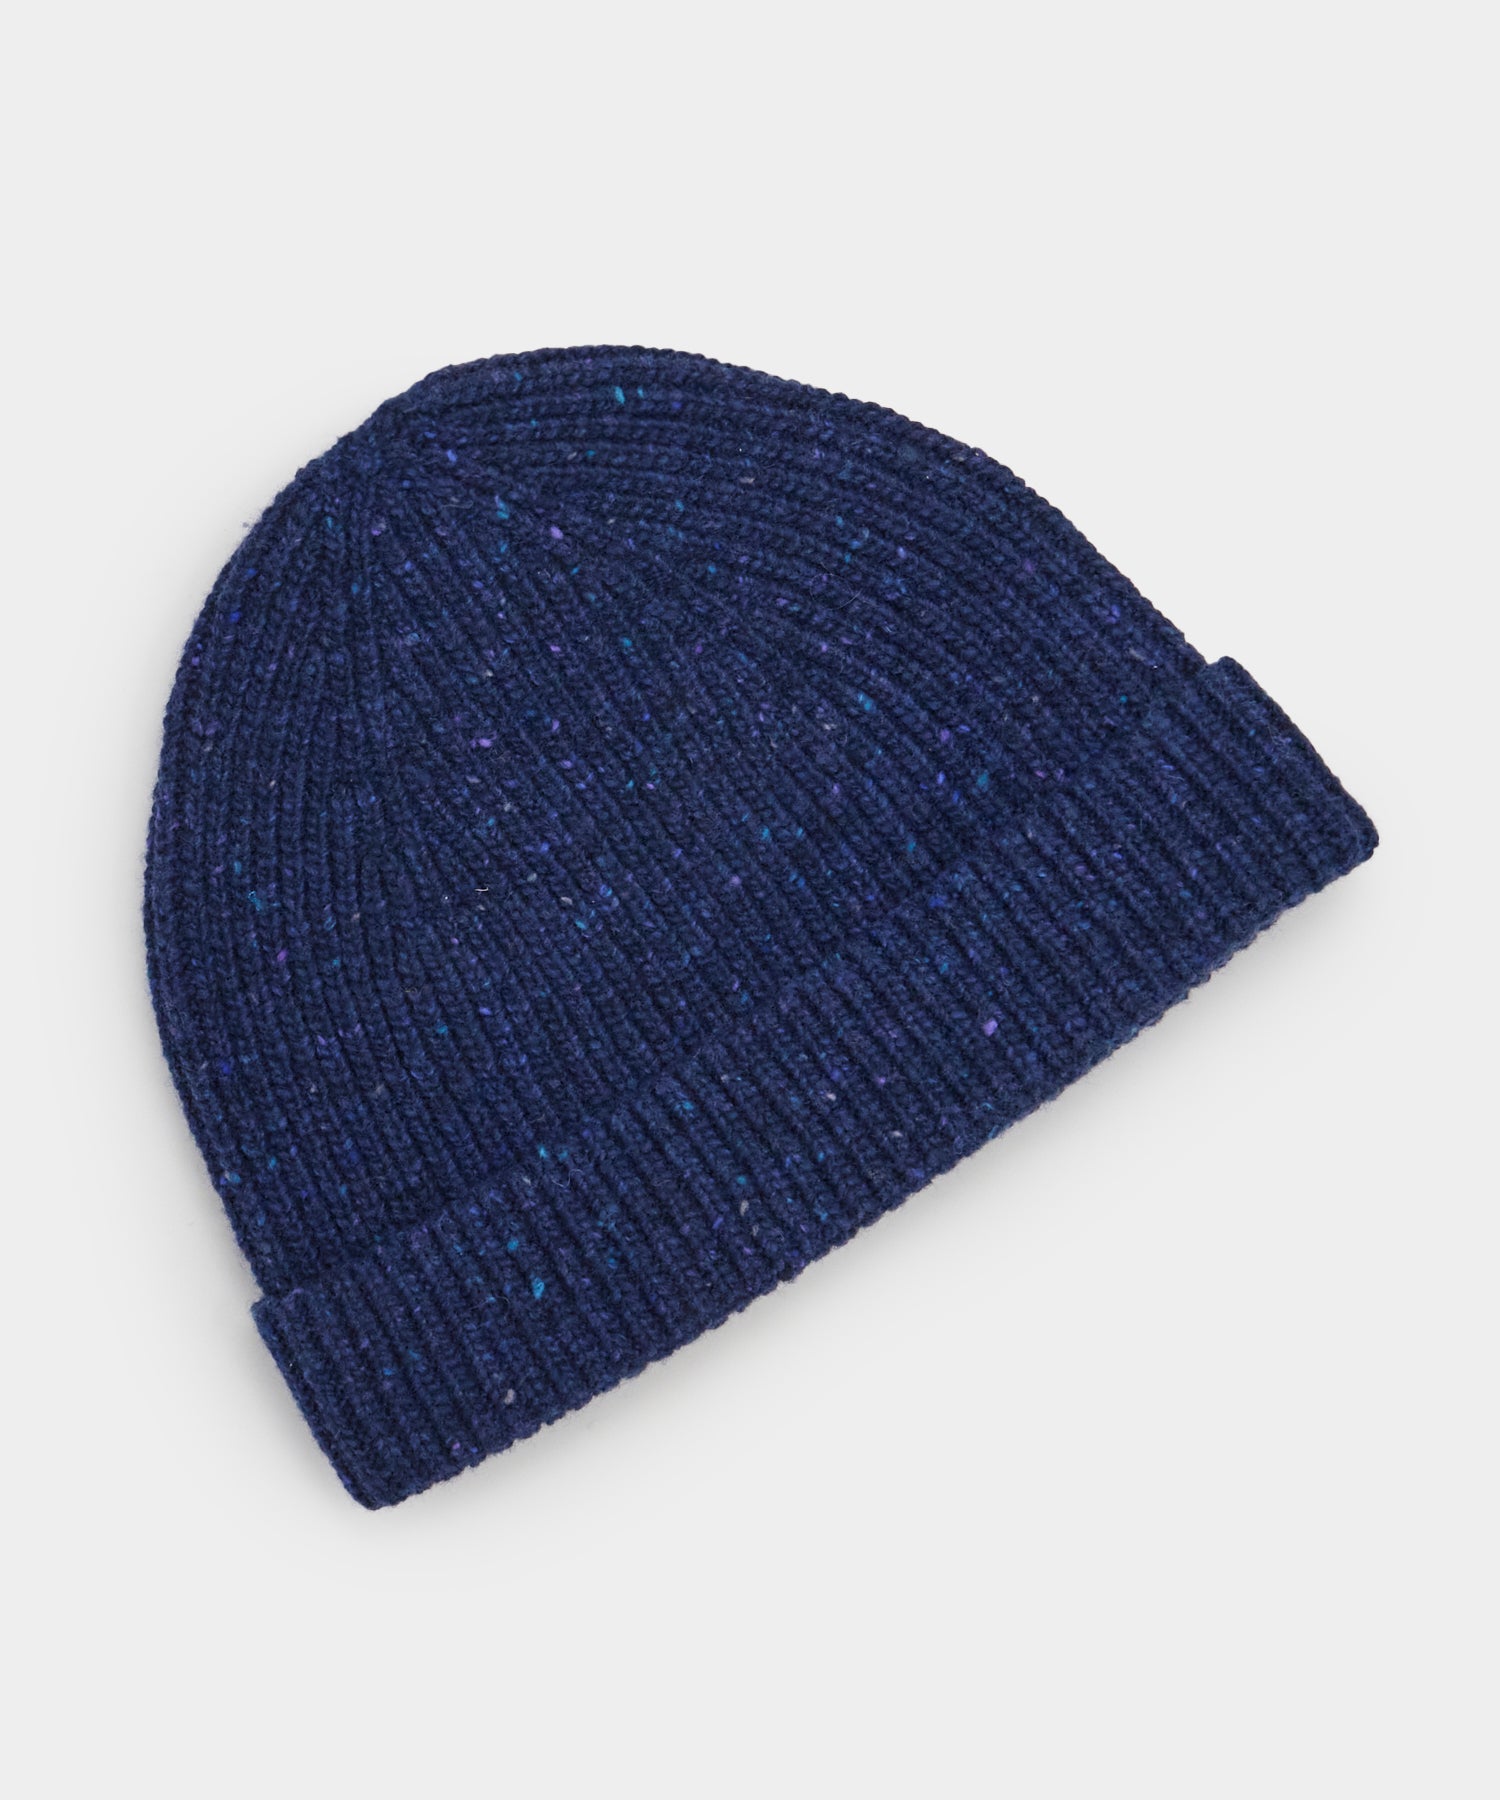 Donegal Beanie in Navy